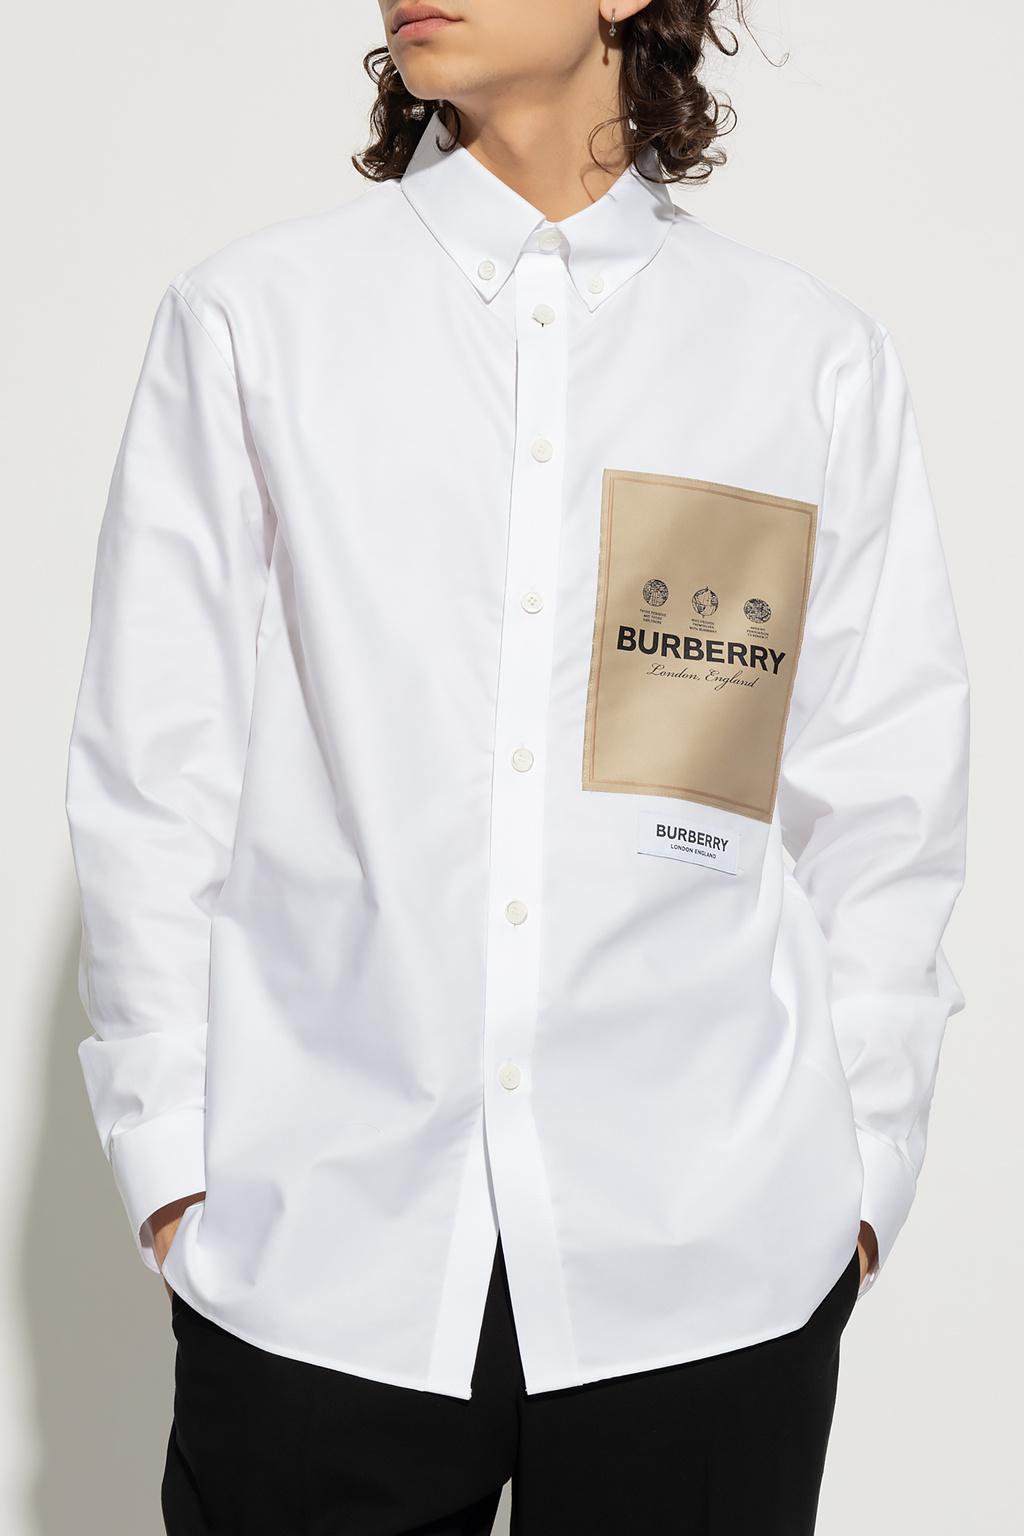 Burberry 'trafford' Shirt With Logo in White for Men | Lyst